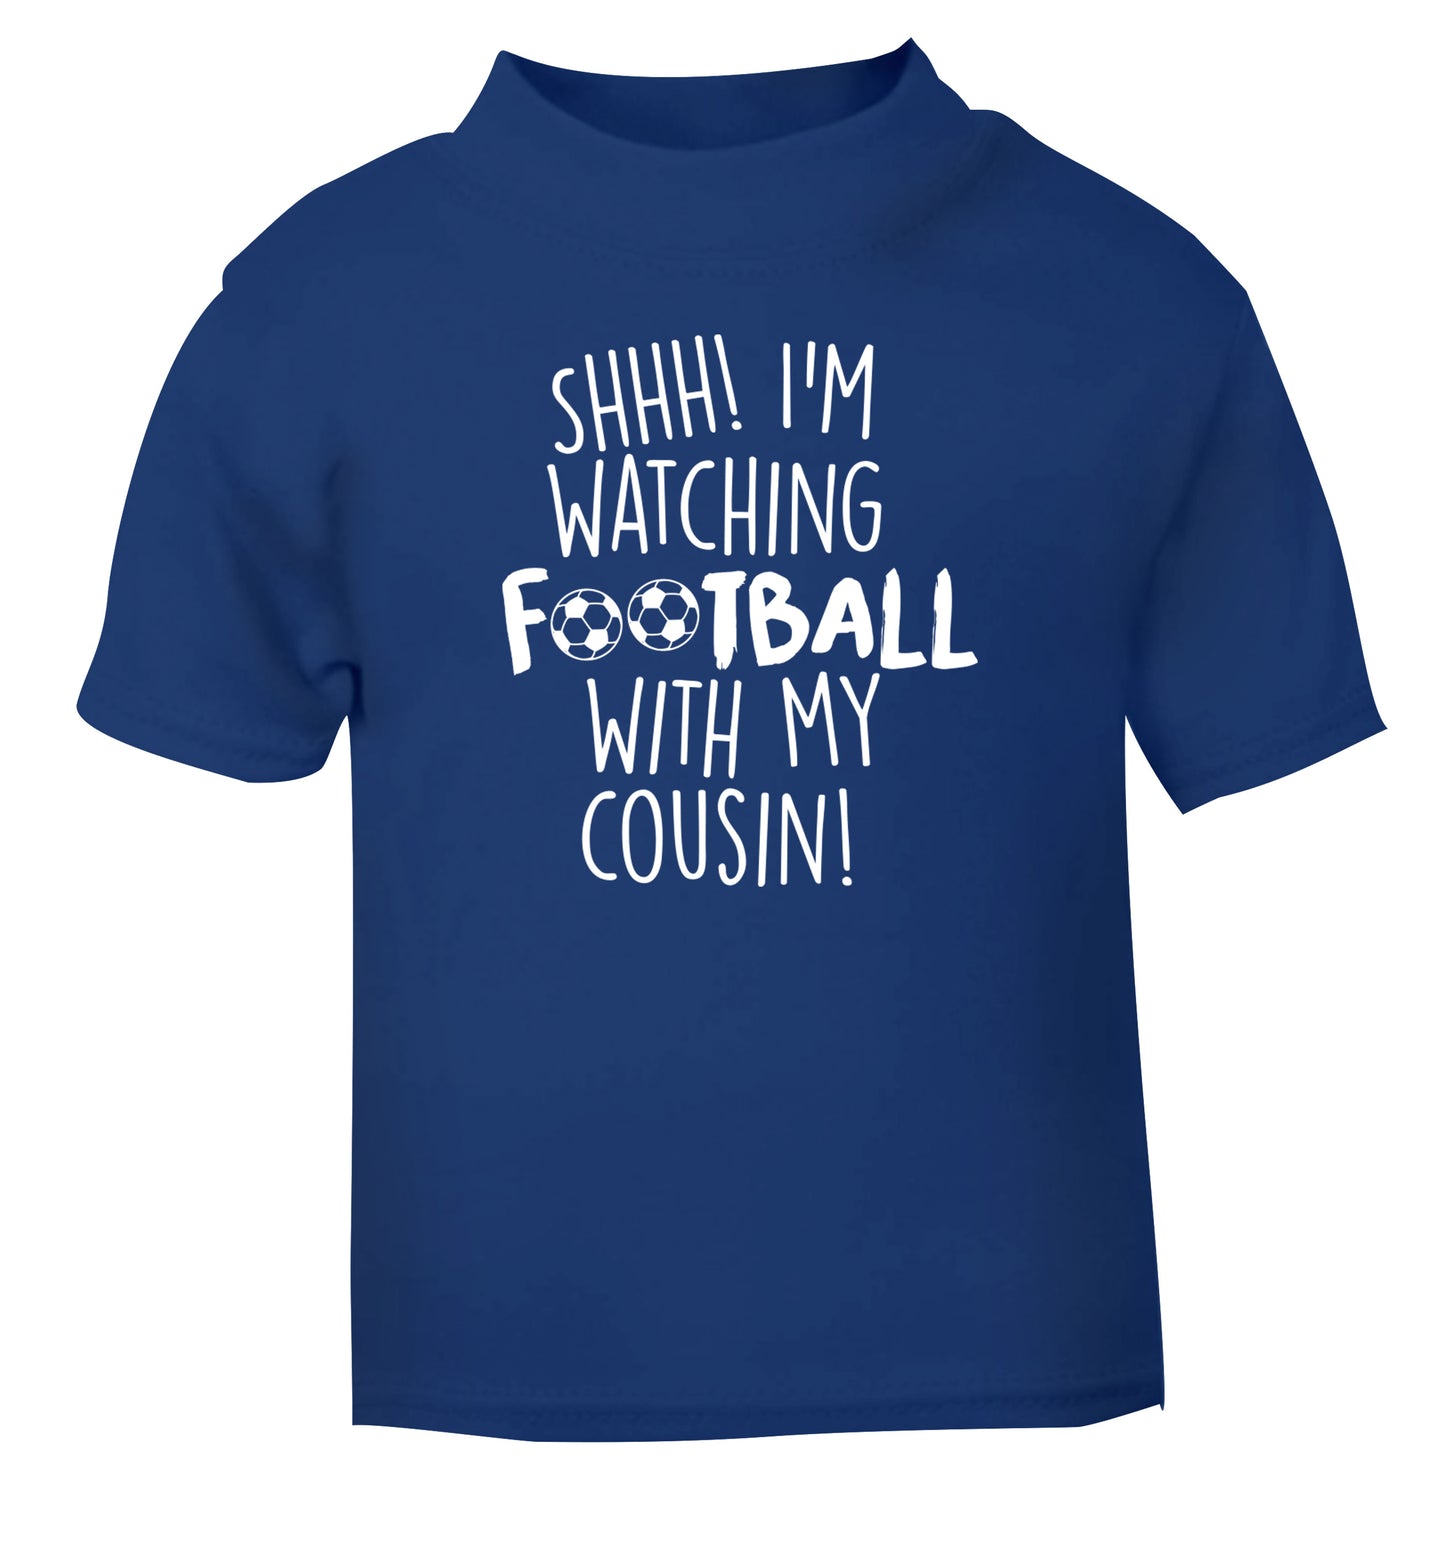 Shhh I'm watching football with my cousin blue Baby Toddler Tshirt 2 Years